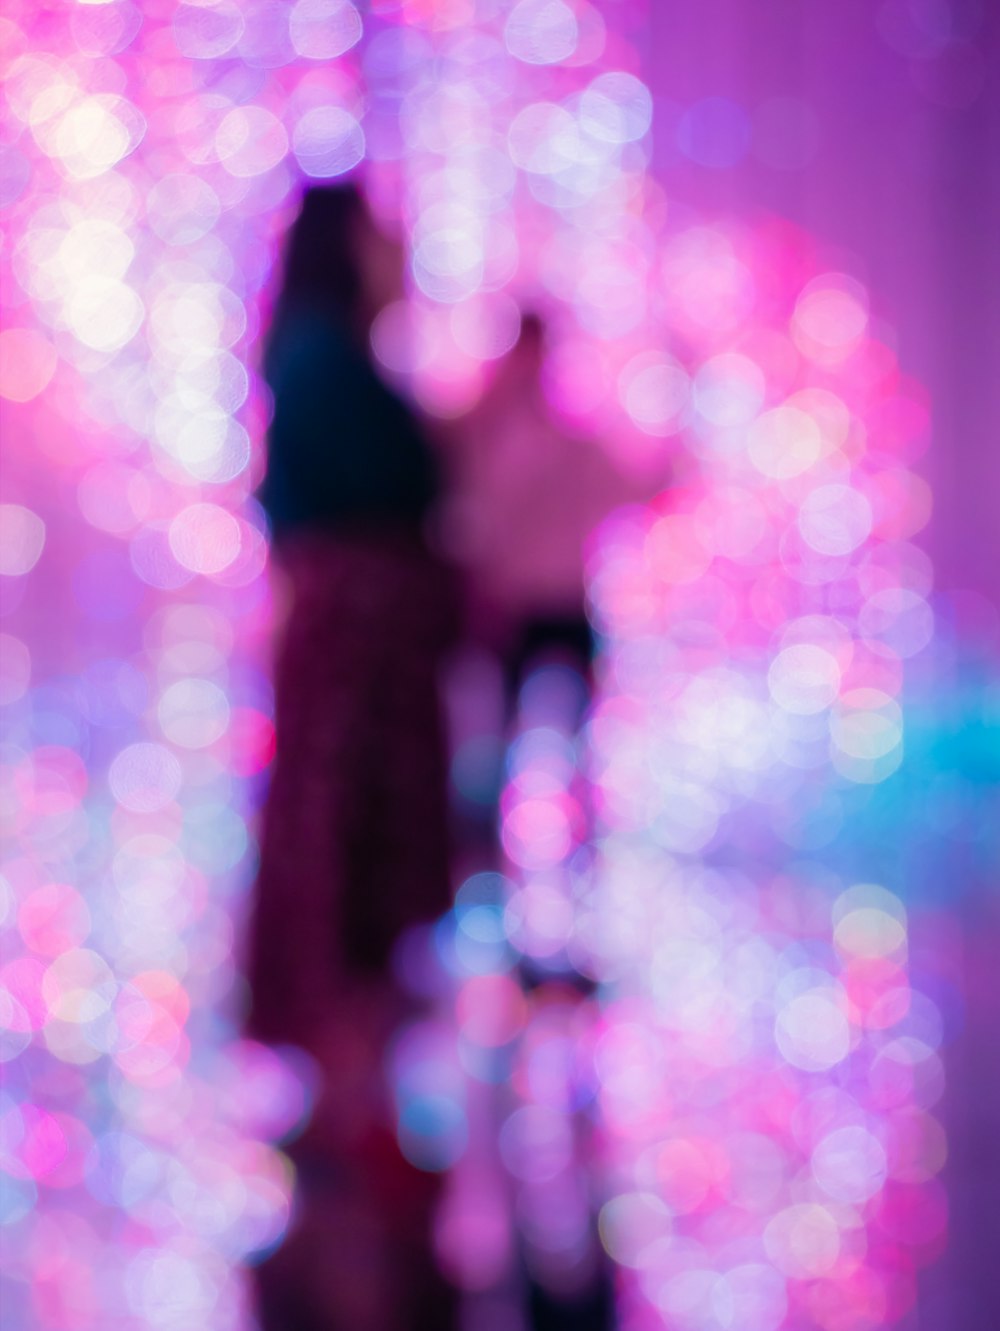 a blurry image of two people standing in front of a mirror